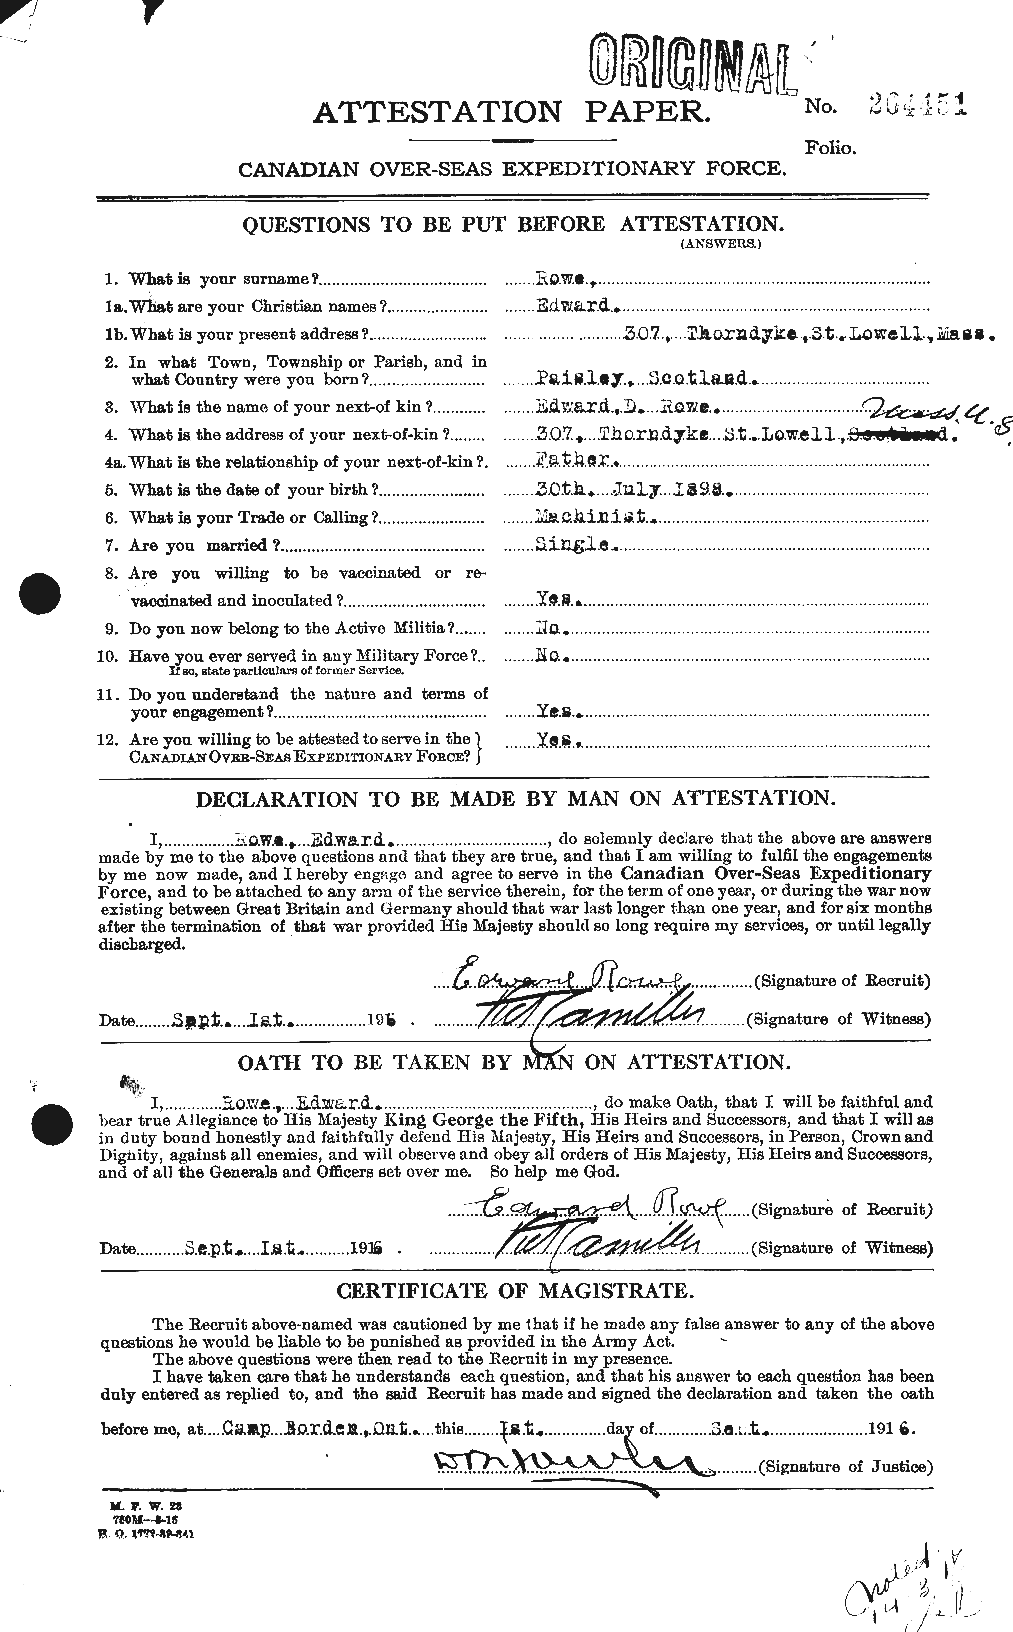 Personnel Records of the First World War - CEF 615833a